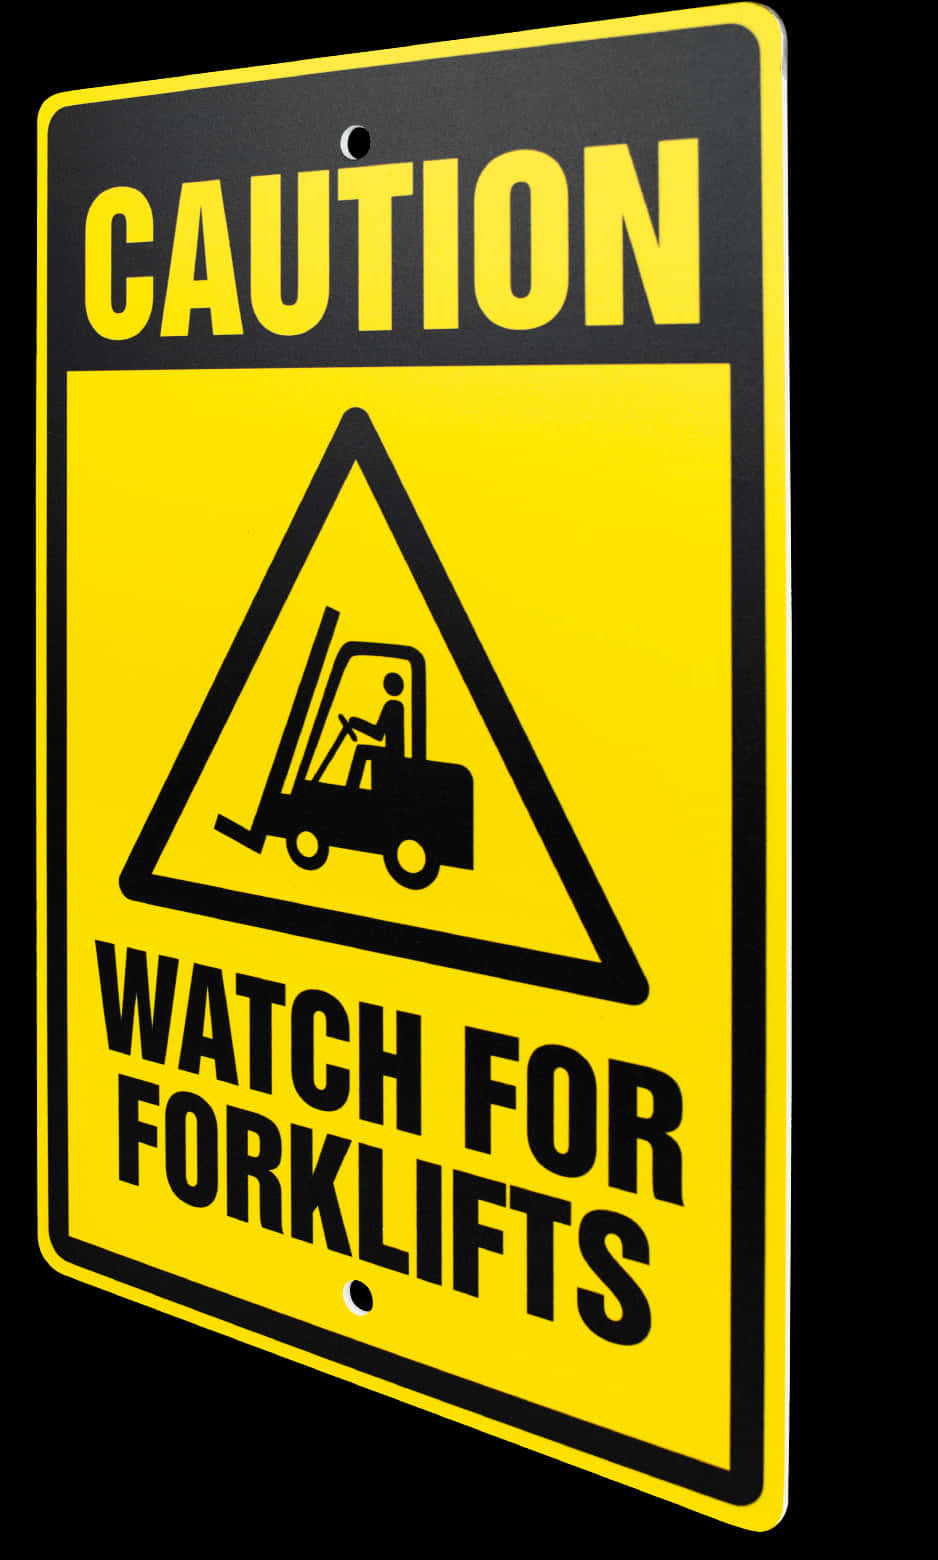 Caution Watch For Forklifts Sign